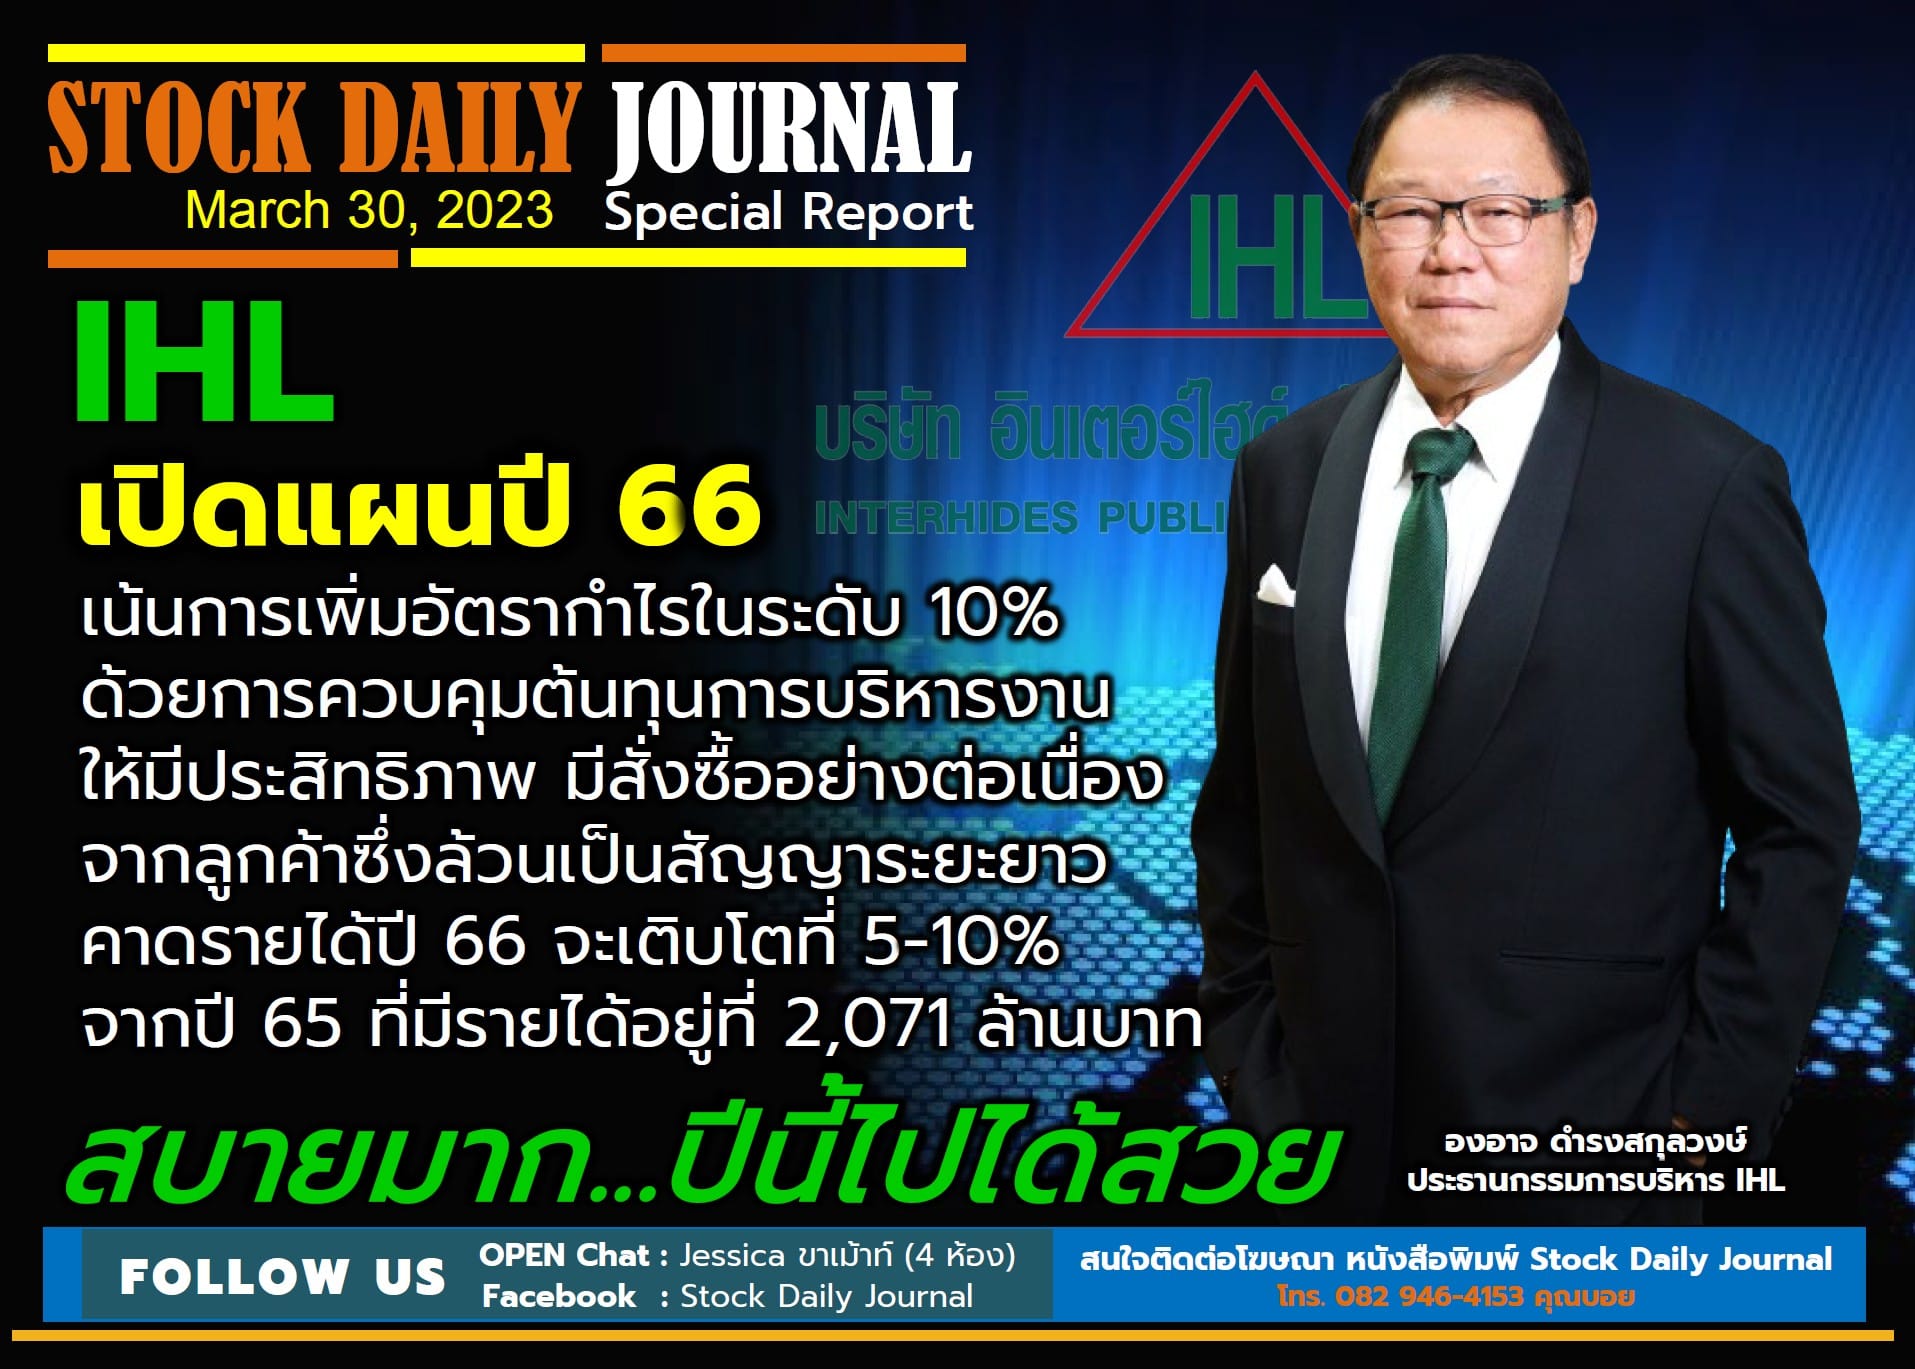 STOCK DAILY JOURNAL “Special Report : IHL”